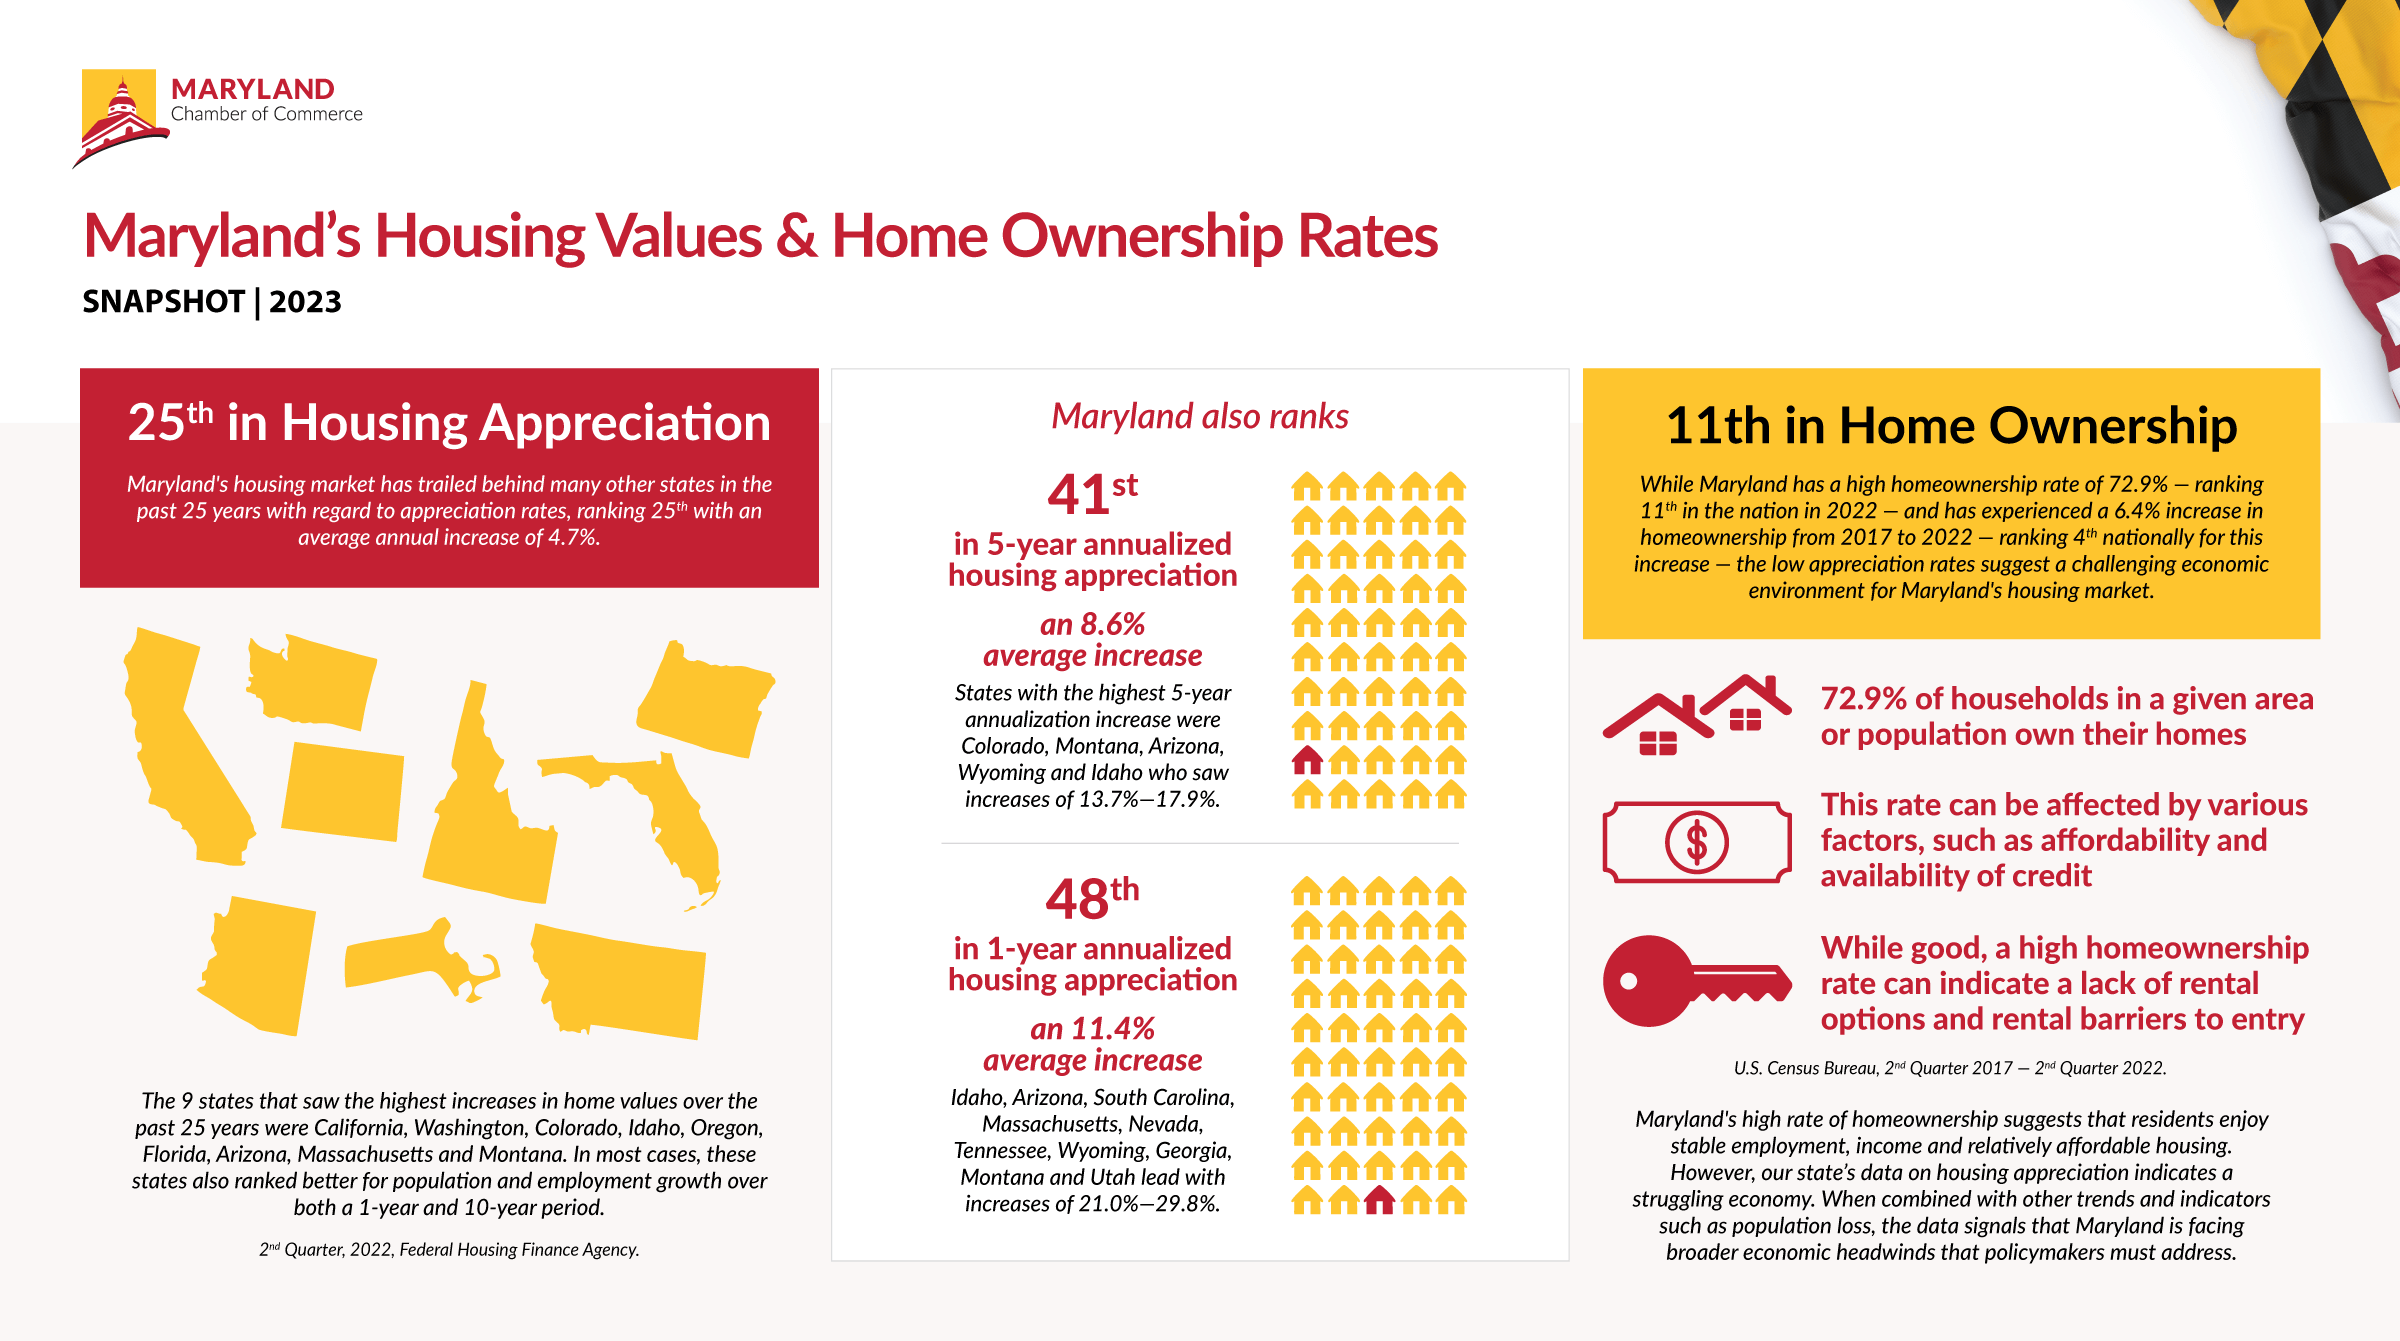 An infographic that demonstrates a variety of rankings regarding Maryland's housing values and home ownership rates vs. other states across the nation, including: Maryland ranks 25th in Housing Appreciation. Maryland's housing market has trailed behind many other states in the past 25 years with regard to appreciation rates, ranking 25th with an annual appreciation rate of 4.7% The 9 states that saw the highest increases in home values over the past 25 years were California, Washington, Colorado, Idaho, Oregon, Florida, Arizona, Massachusetts and Montana. In most cases, these states also ranked better for population and employment growth over both a 1-year and 10-year period. Maryland also ranks: 41st in 5-year annualized housing appreciation, with a 8.6% average increase. States with the highest 5-year annualization increase were Colorado, Montana, Arizona, Wyoming and Idaho, who saw increases of 13.7%-17.9%. 48th in 1-year annualized housing appreciation, with an 11.4% average increase. Idaho, Arizona, South Caroline, Massachusetts, Nevada, Tennessee, Wyoming, Georgia, Montana and Utah led with increase of 21.0% to 29.8%. Maryland ranks 11th in Home Ownership. While Maryland has a high homeownership rate of 72.9% (ranked 11th in the nation in 2022) and has experienced a 6.4% increase in homeownership from 2017 to 2022 (ranked 4th nationally for this increase), the low appreciation rates suggest a challenging economic environment for Maryland’s housing market. 72.9% of households in a given area or population own their homes. This rate can be affected by various factors, such as affordability and availability of credit. While good, a high homeownership rate can indicate a lack of rental options and rental barriers to entry. Maryland’s high rate of homeownership suggests that residents enjoy stable employment, income, and relatively affordable housing. However, Maryland’s data on housing appreciation indicates a struggling economy. When combined with other trends and indicators such as population loss, moderate job growth, and a challenging business environment, where Maryland ranks in regards to housing appreciation signals that Maryland is facing broader economic headwinds that policymakers must address.